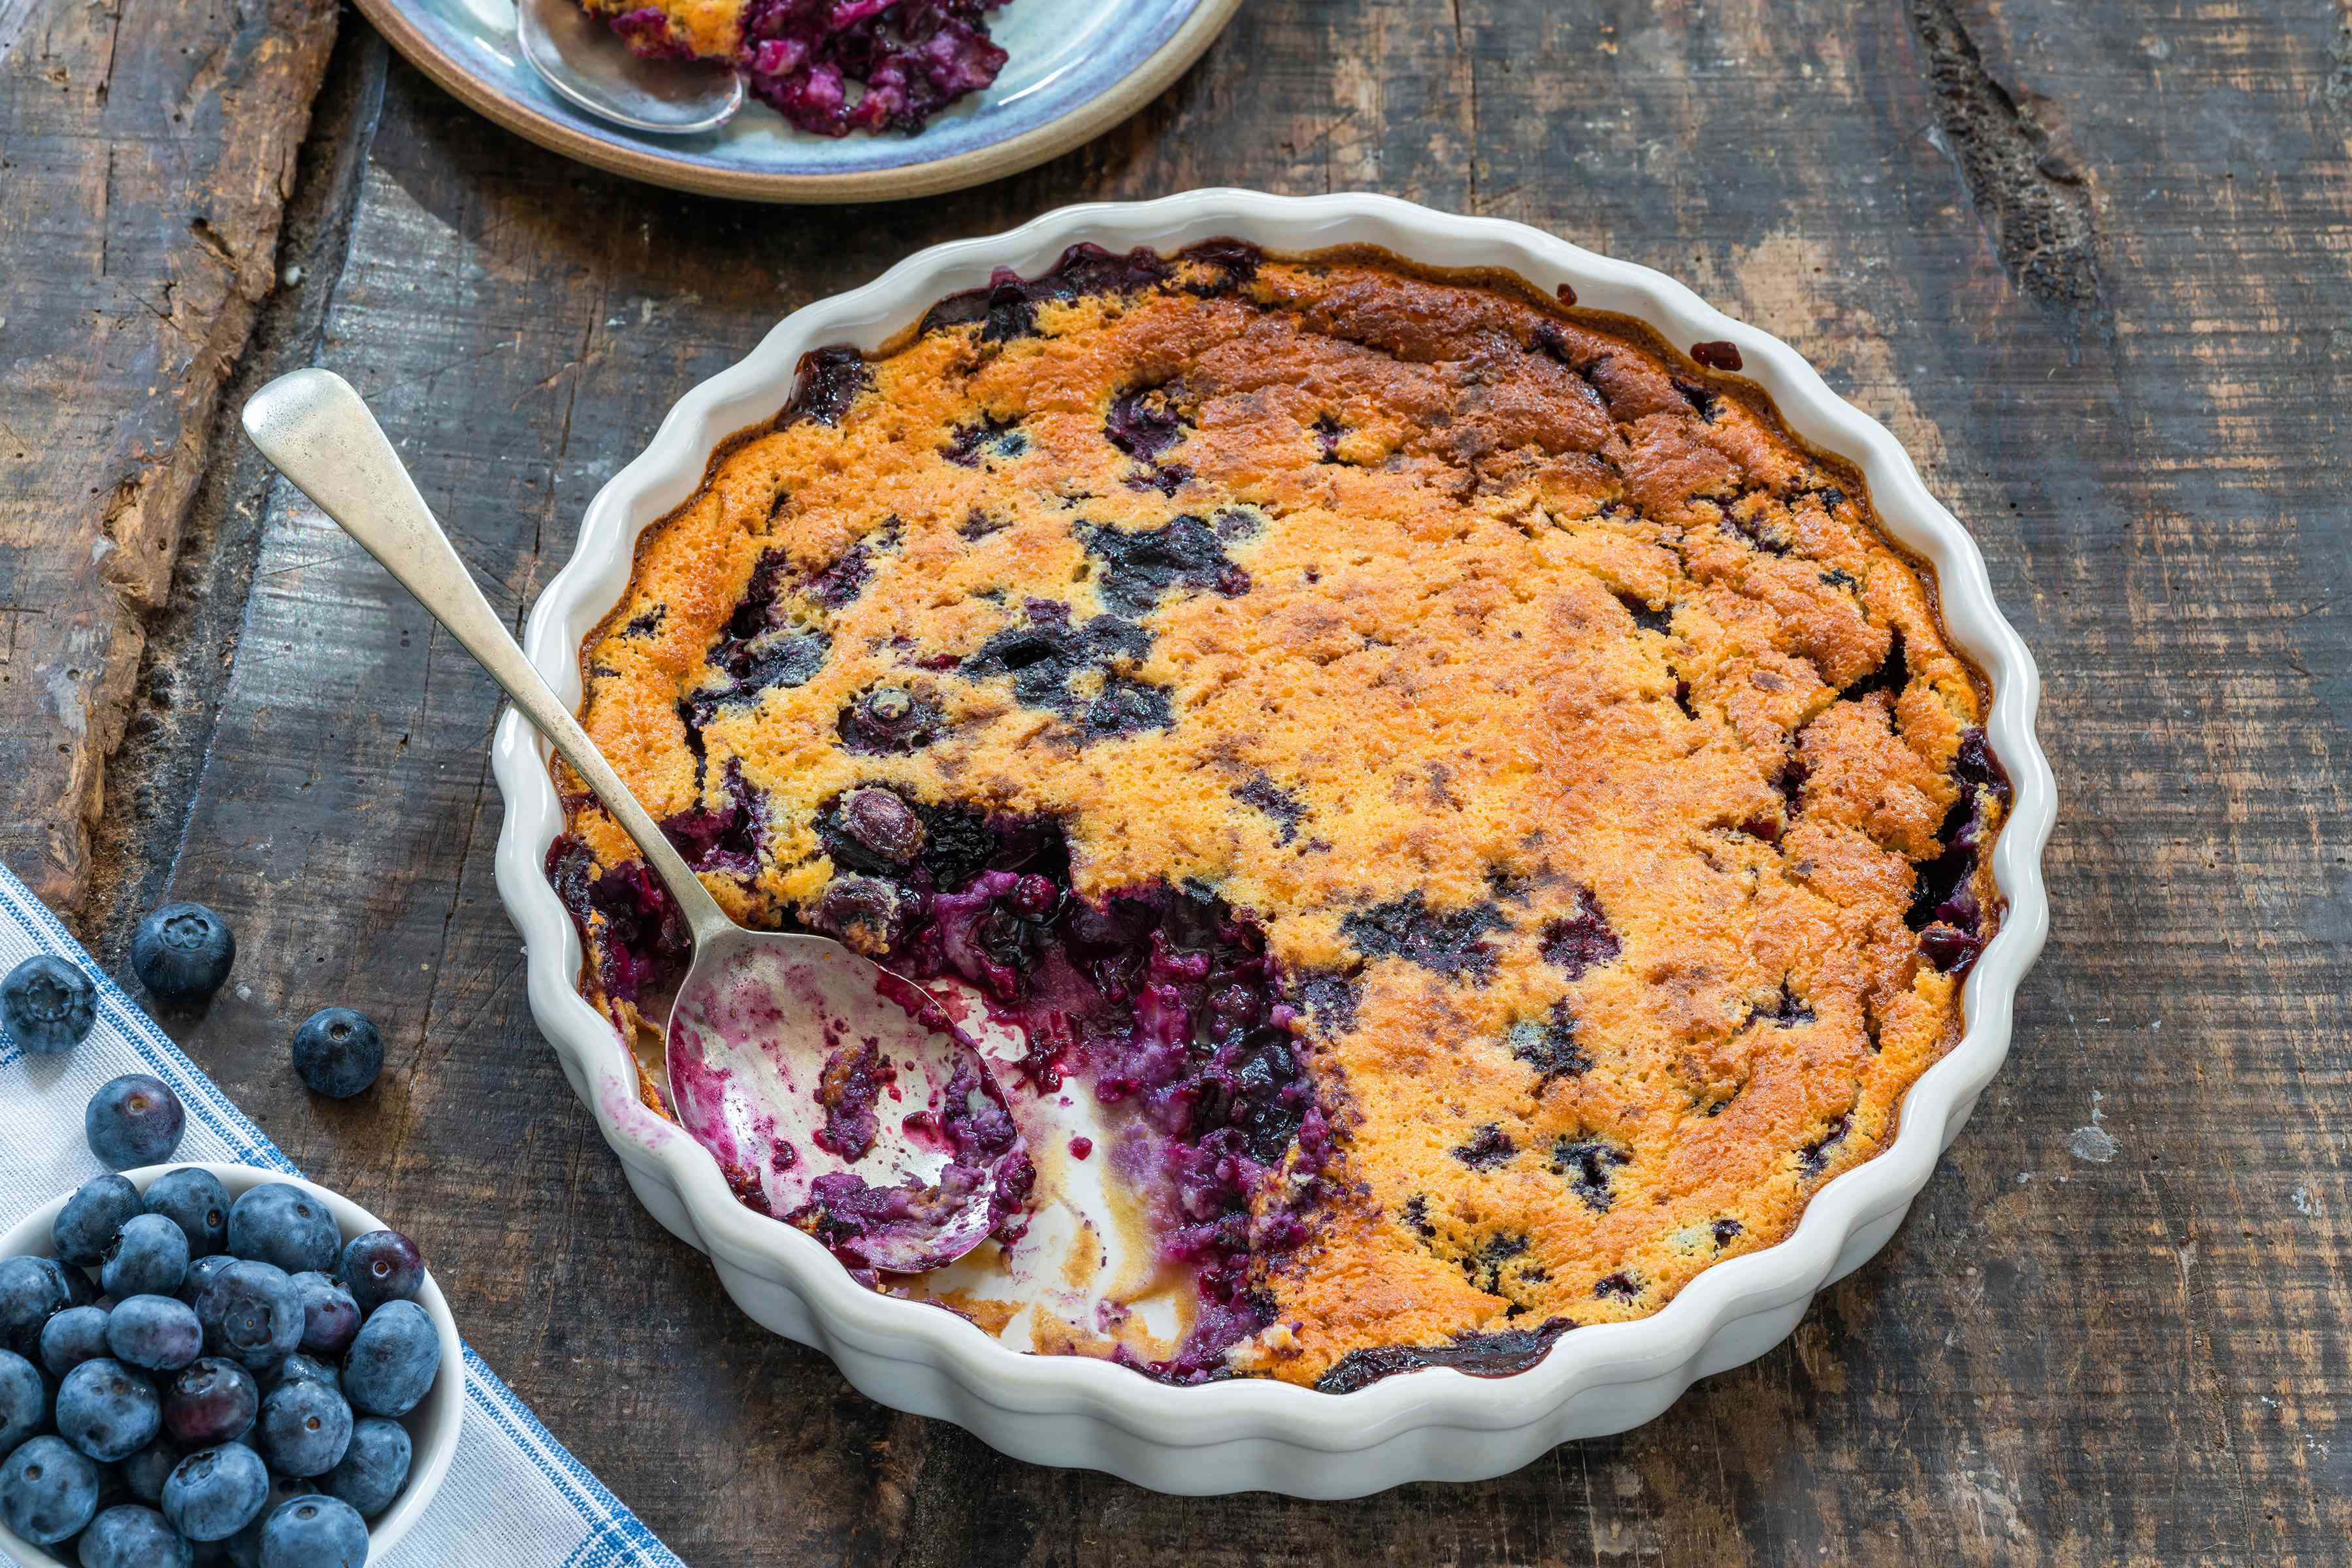 Blueberry clafoutis in baking dish with serving spoon.